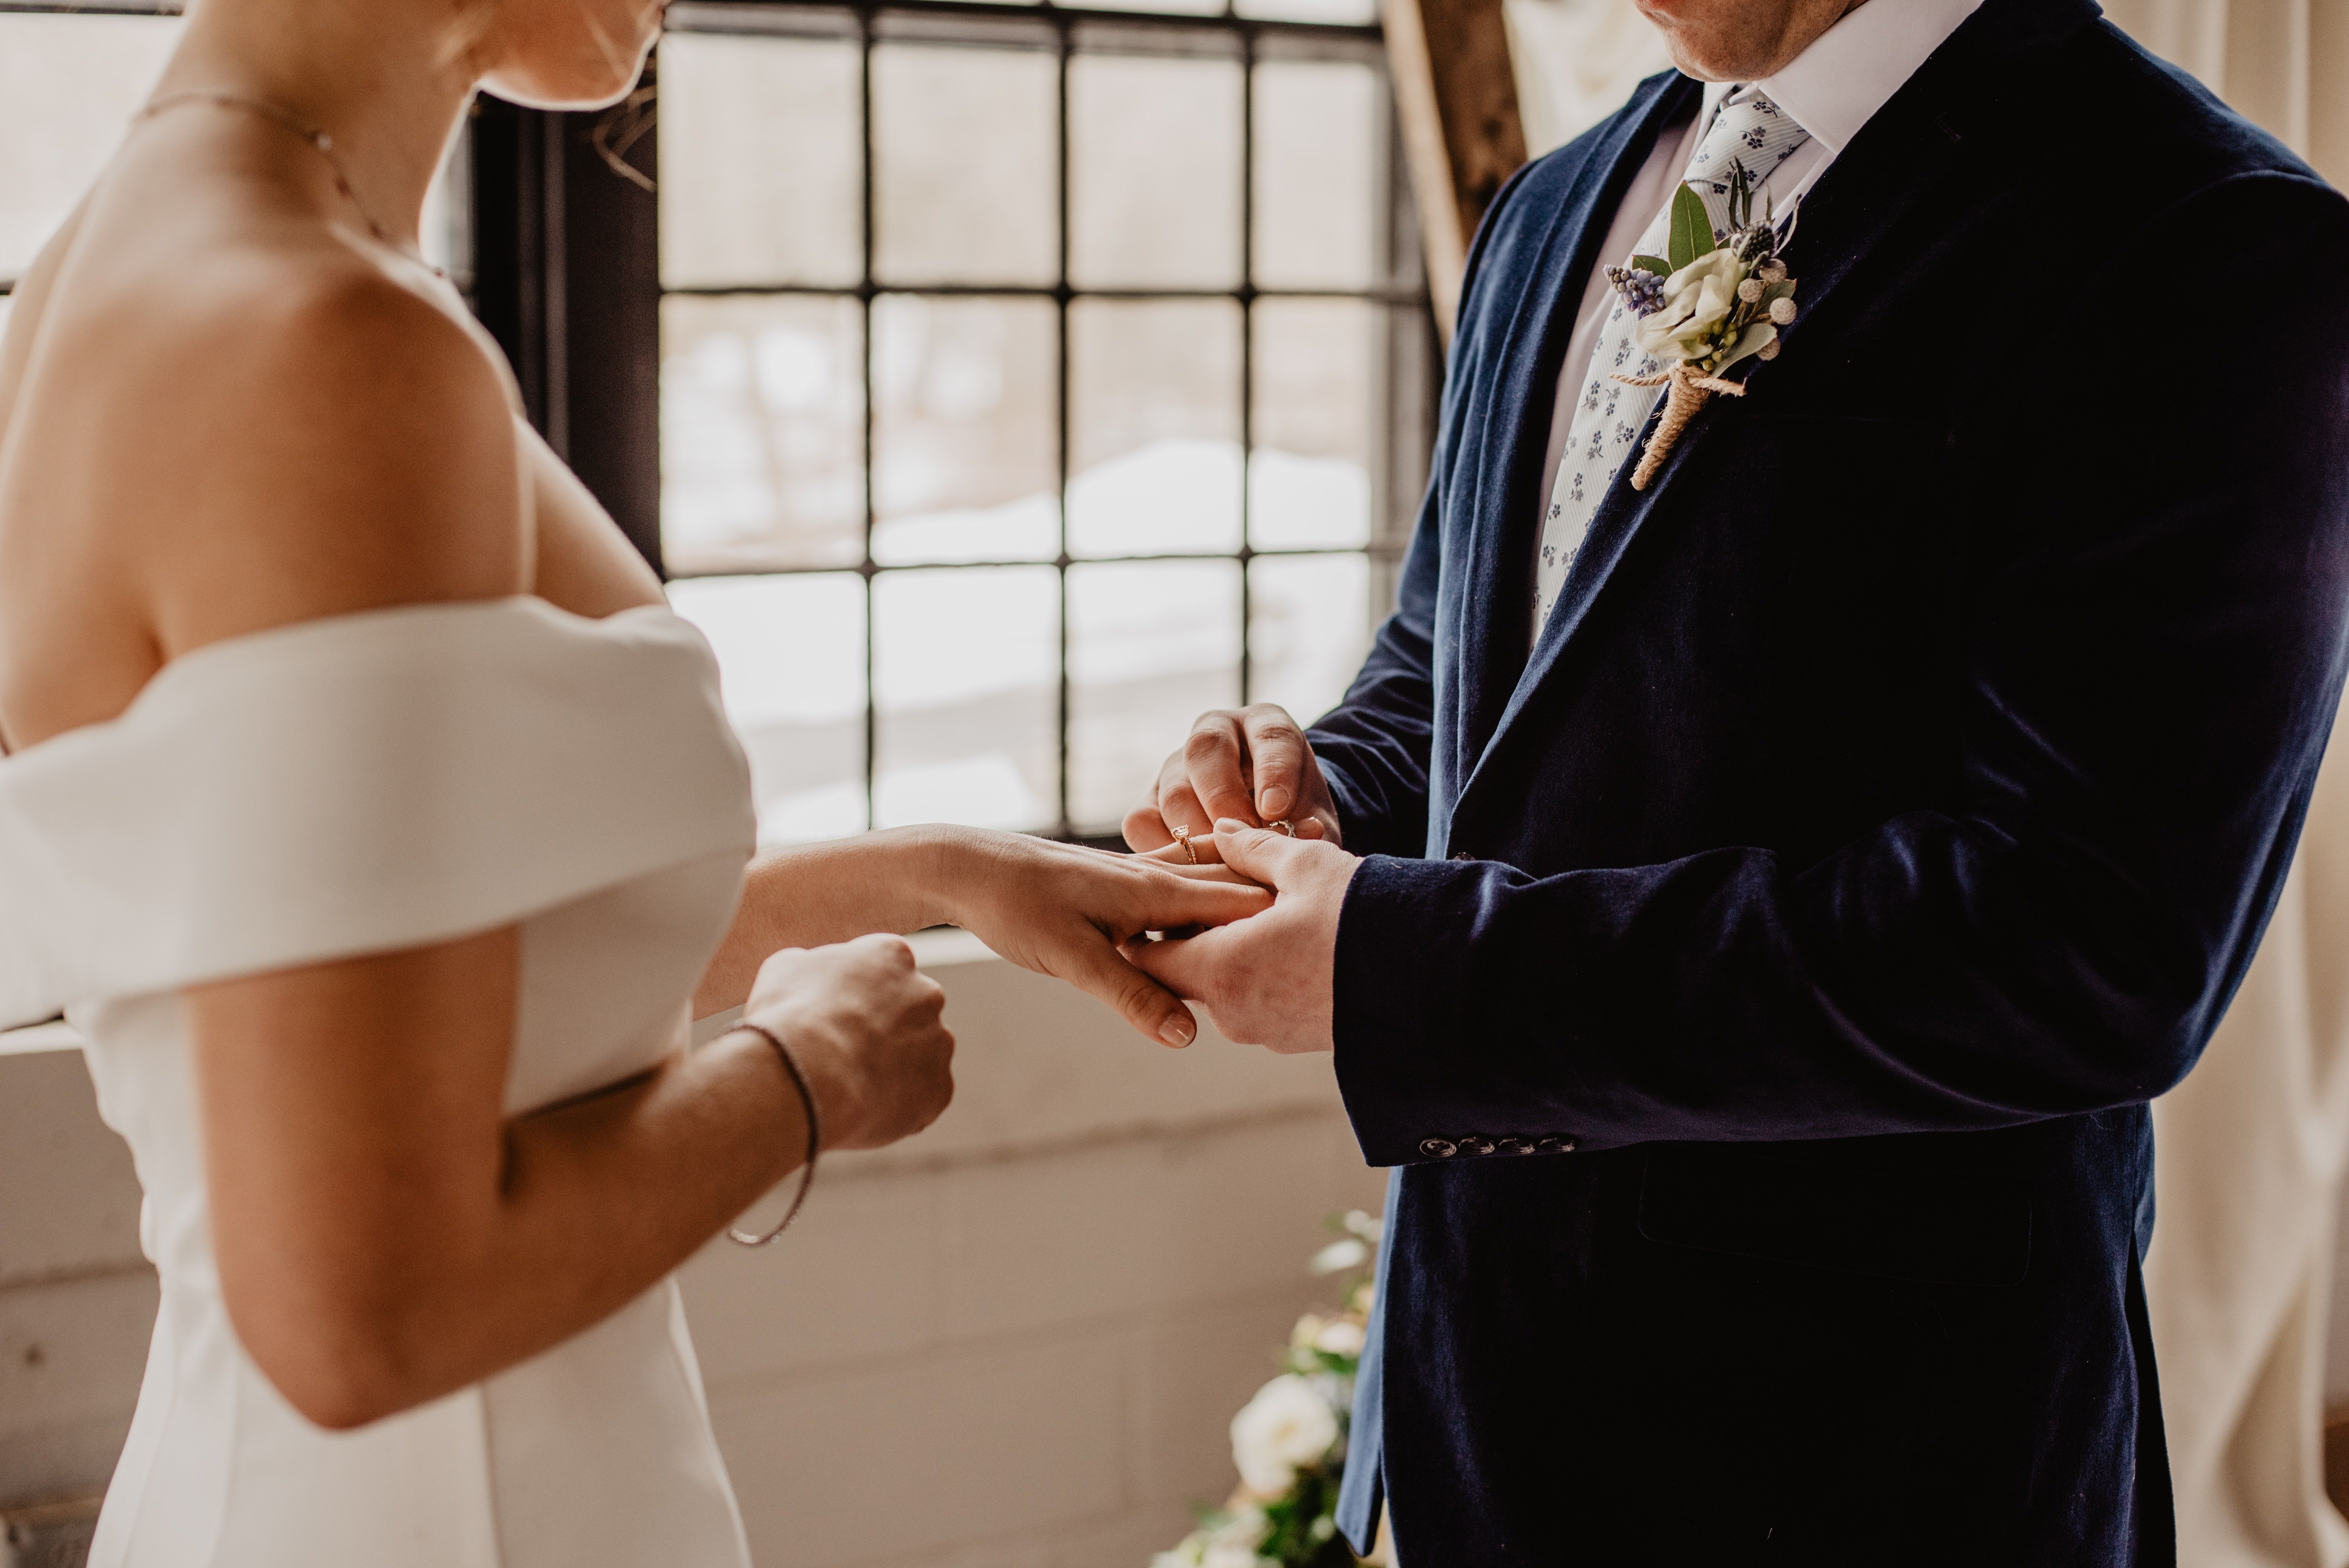 Laurie and Adam lived happily ever after. | Source: Pexels